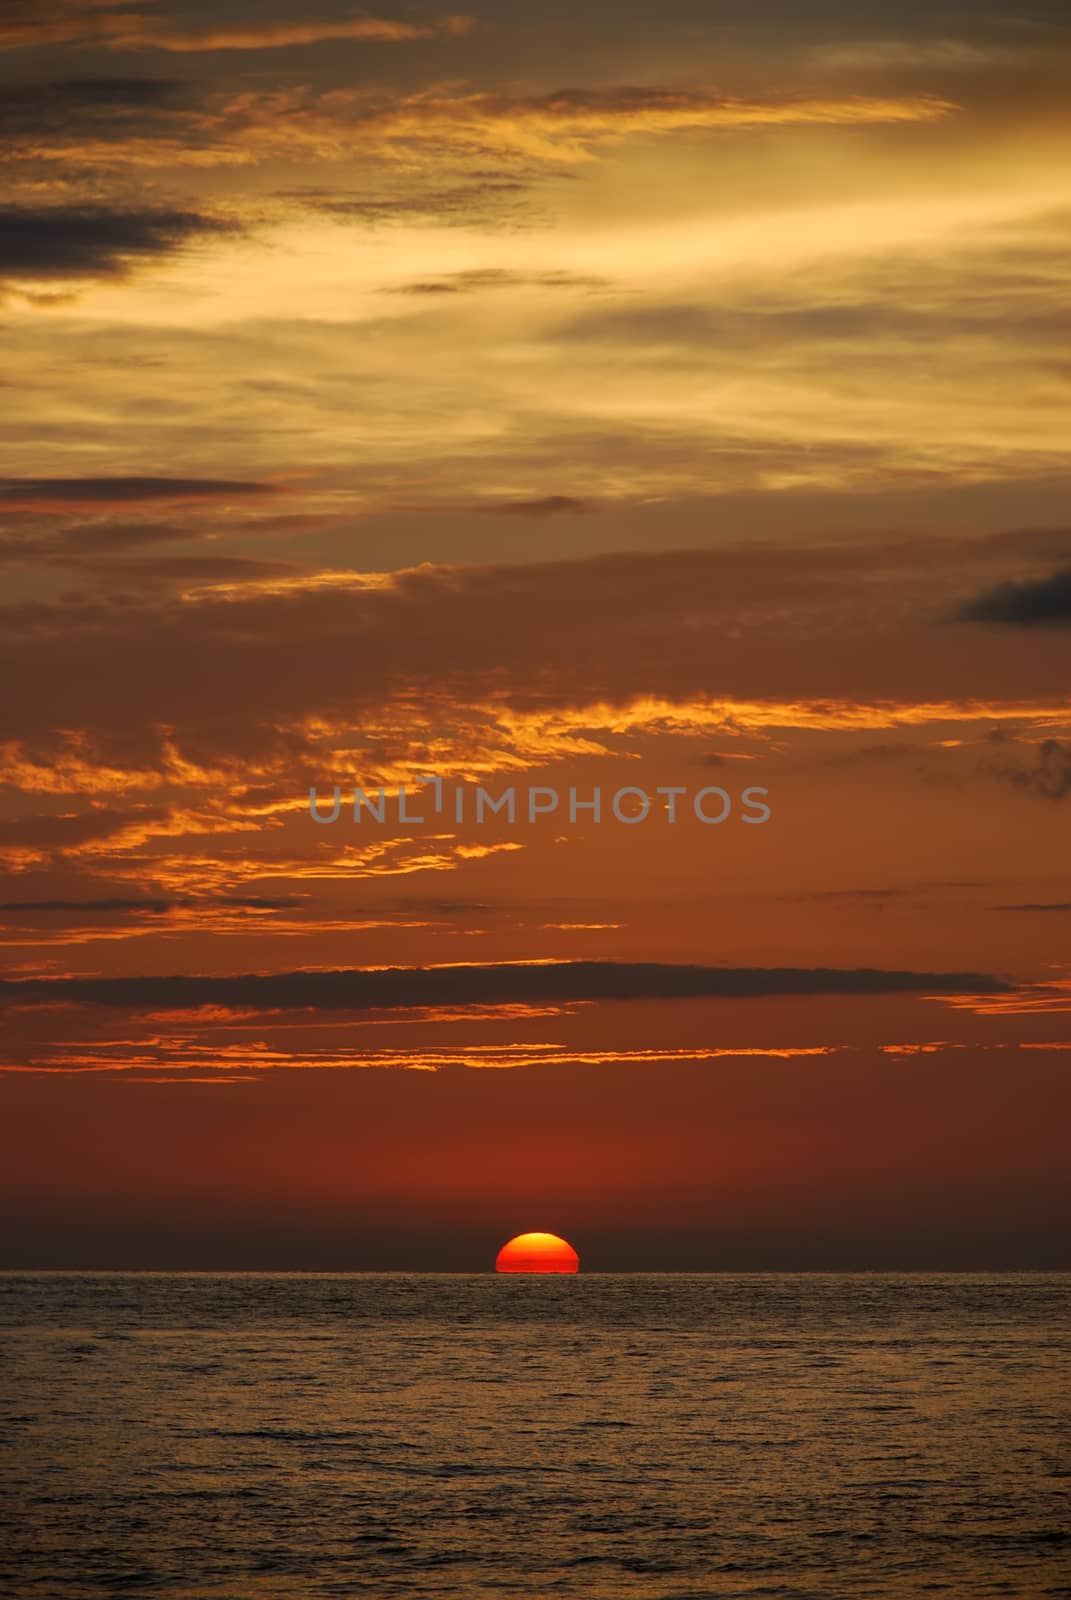 Puerto Vallarta is famous by its beautiful sunsets. This is one of them.